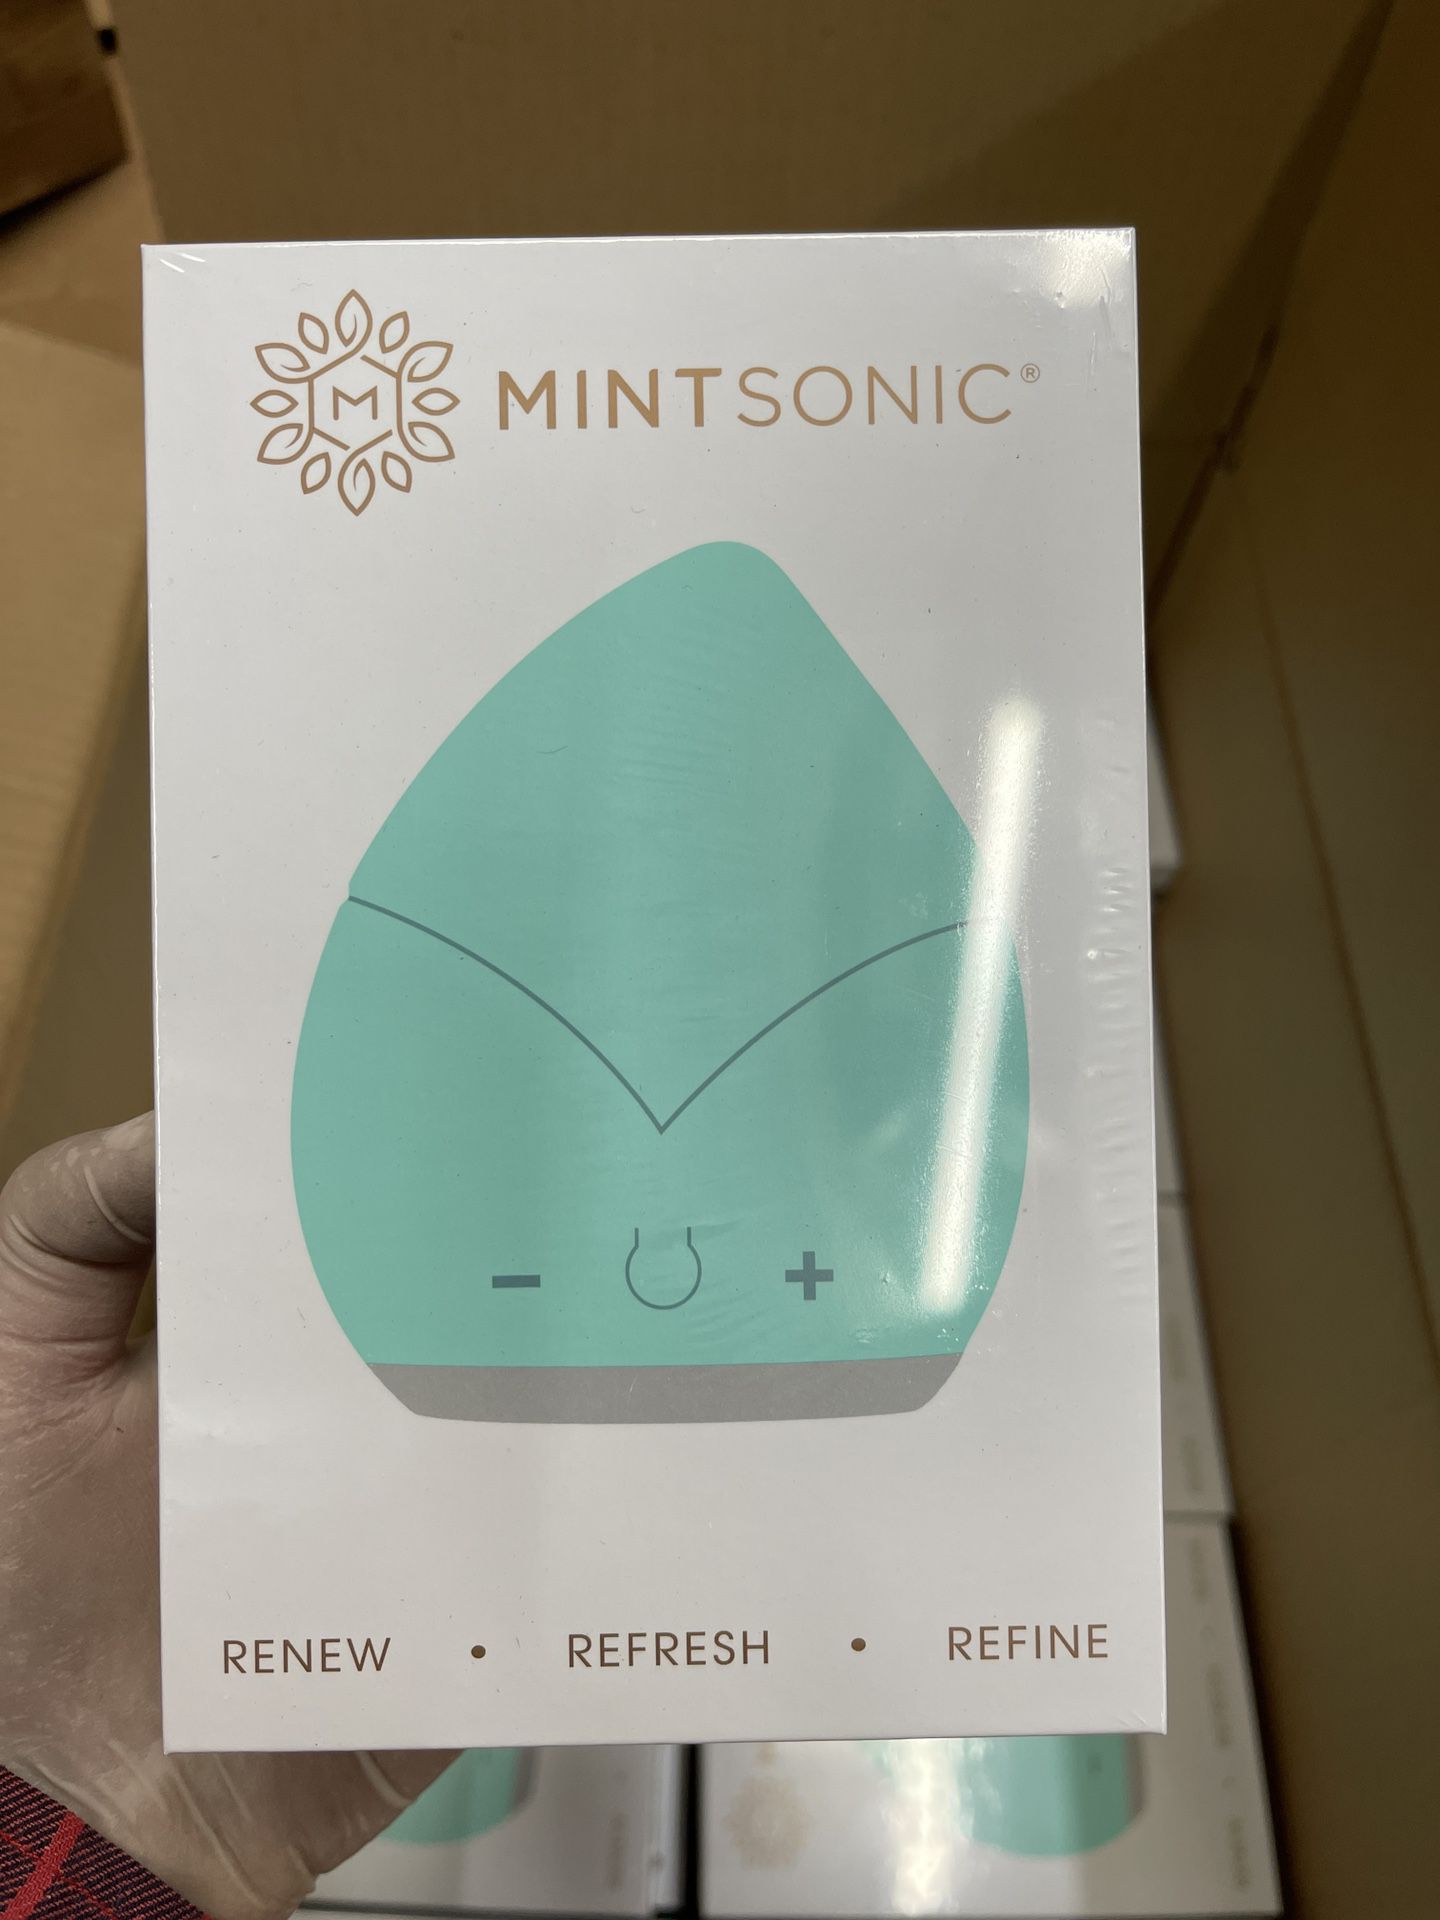 MINTSonic Facial & Body Brush Cleansing System - Anti Aging Skin Care Face Massager - Exfoliating Microdermabrasion Pore Minimizer to Smooth Skin Help